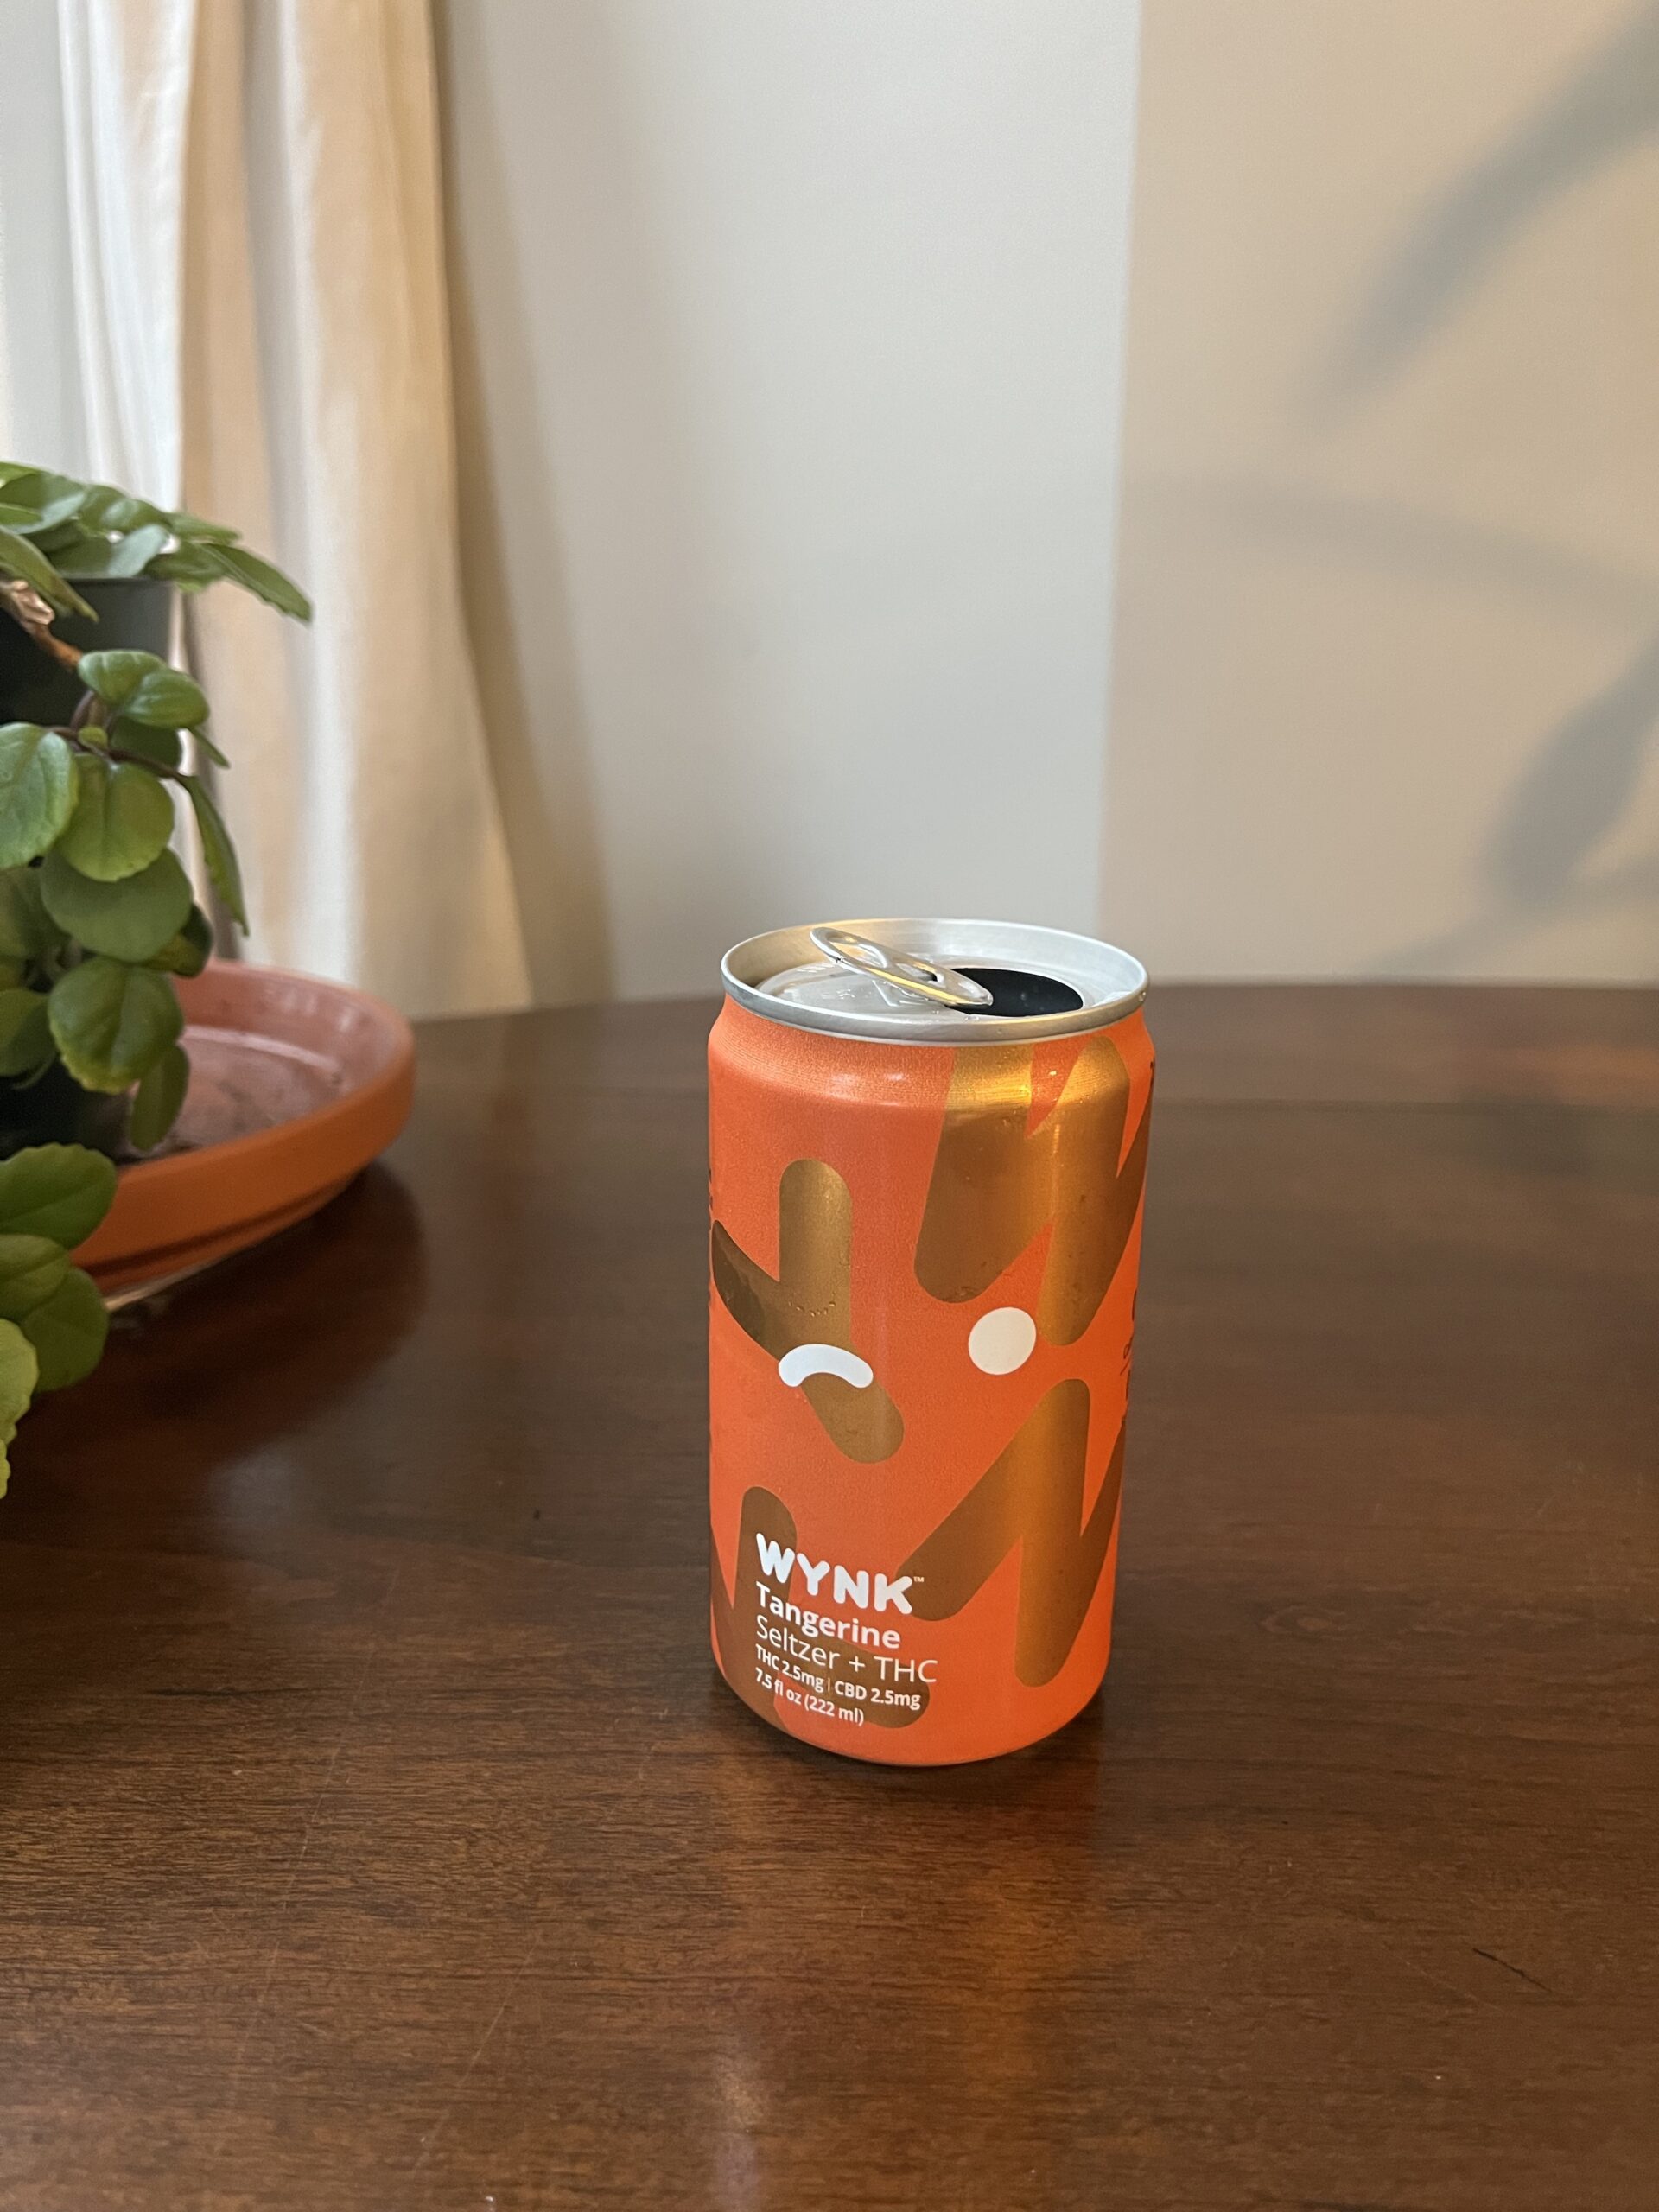 A tangerine-flavored Wynk cannabis seltzer can with an orange and white design is placed on a wooden table next to a potted plant.